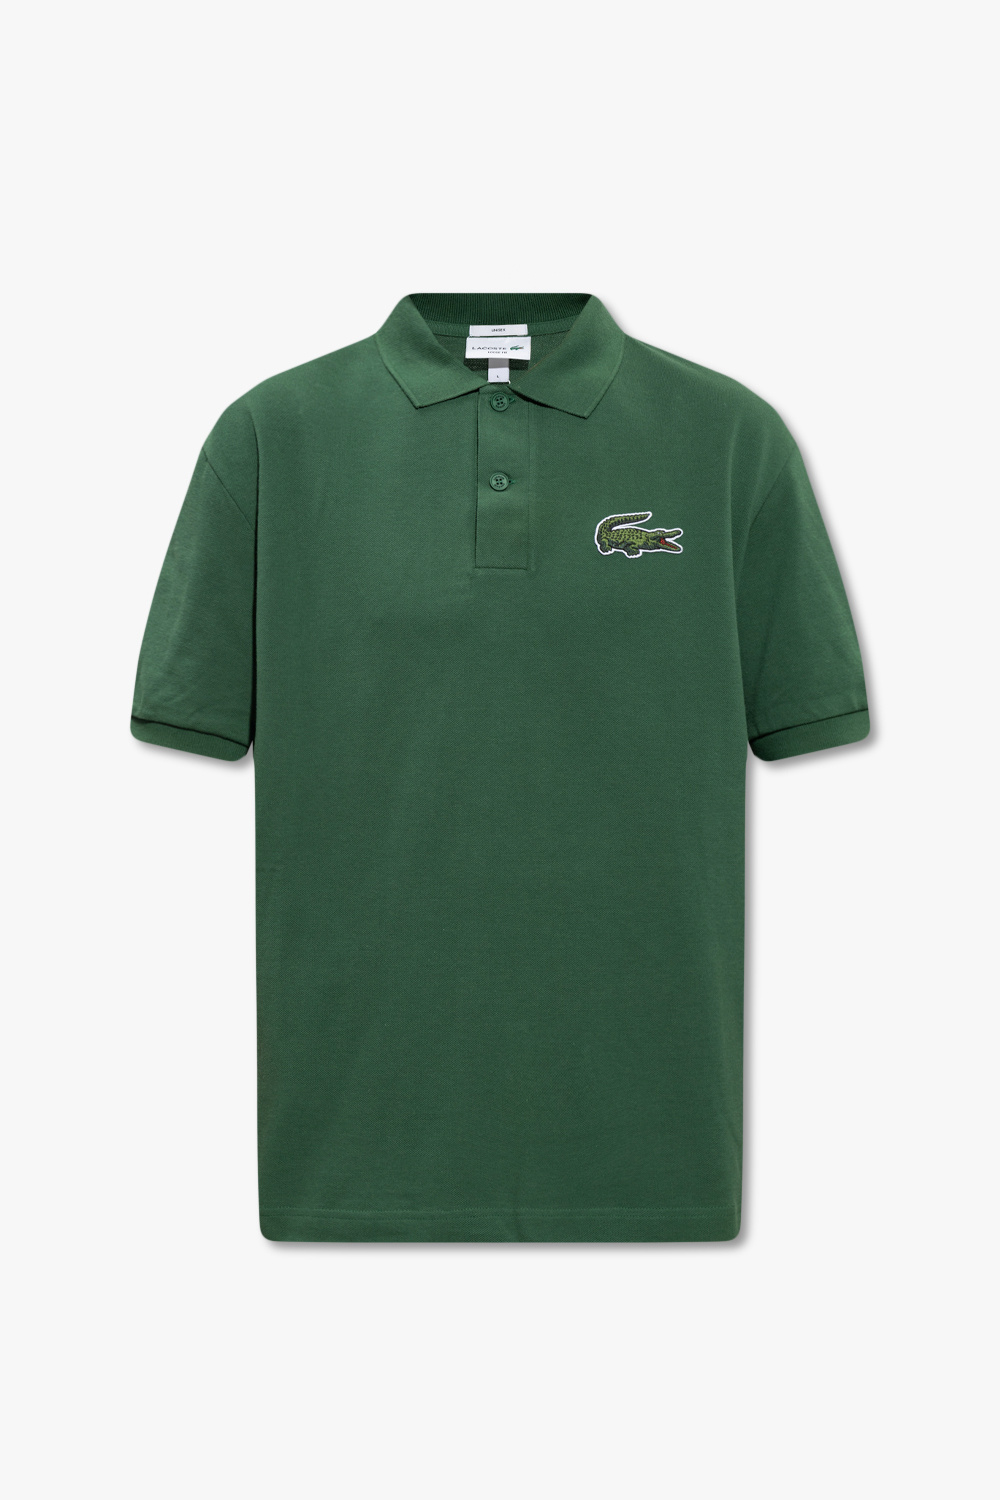 Green Polo shirt with Lacoste Germany